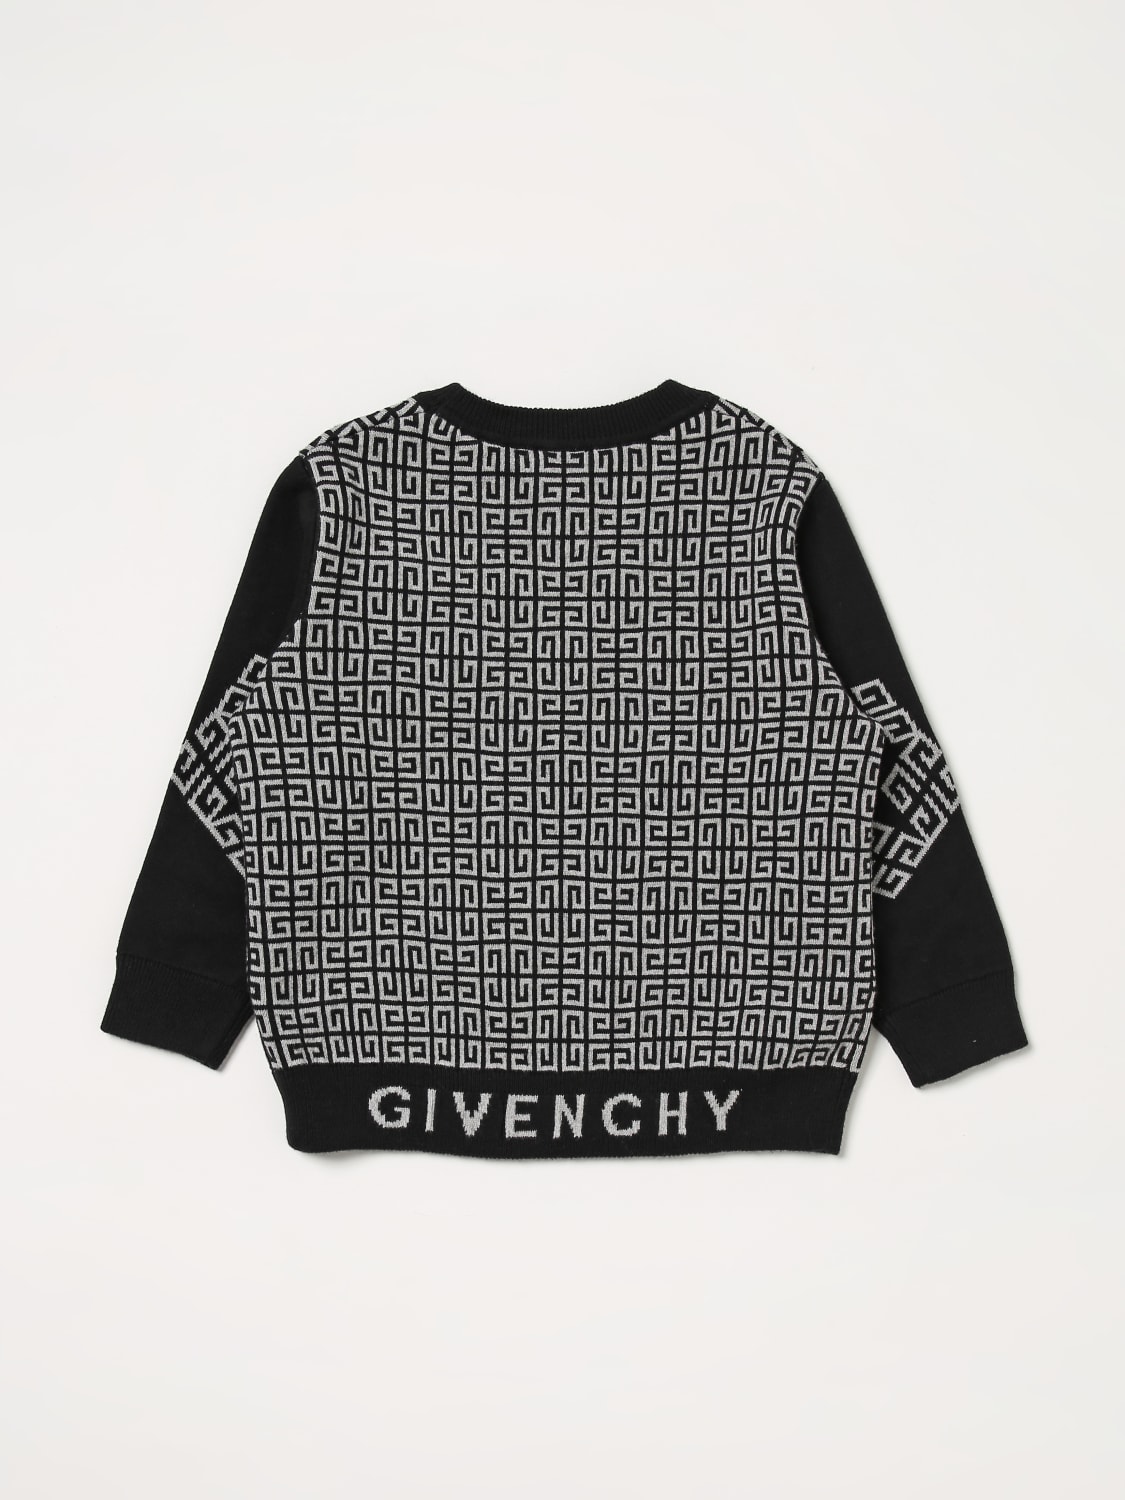 GIVENCHY: Sweater kids - Black  GIVENCHY sweater H25470 online at